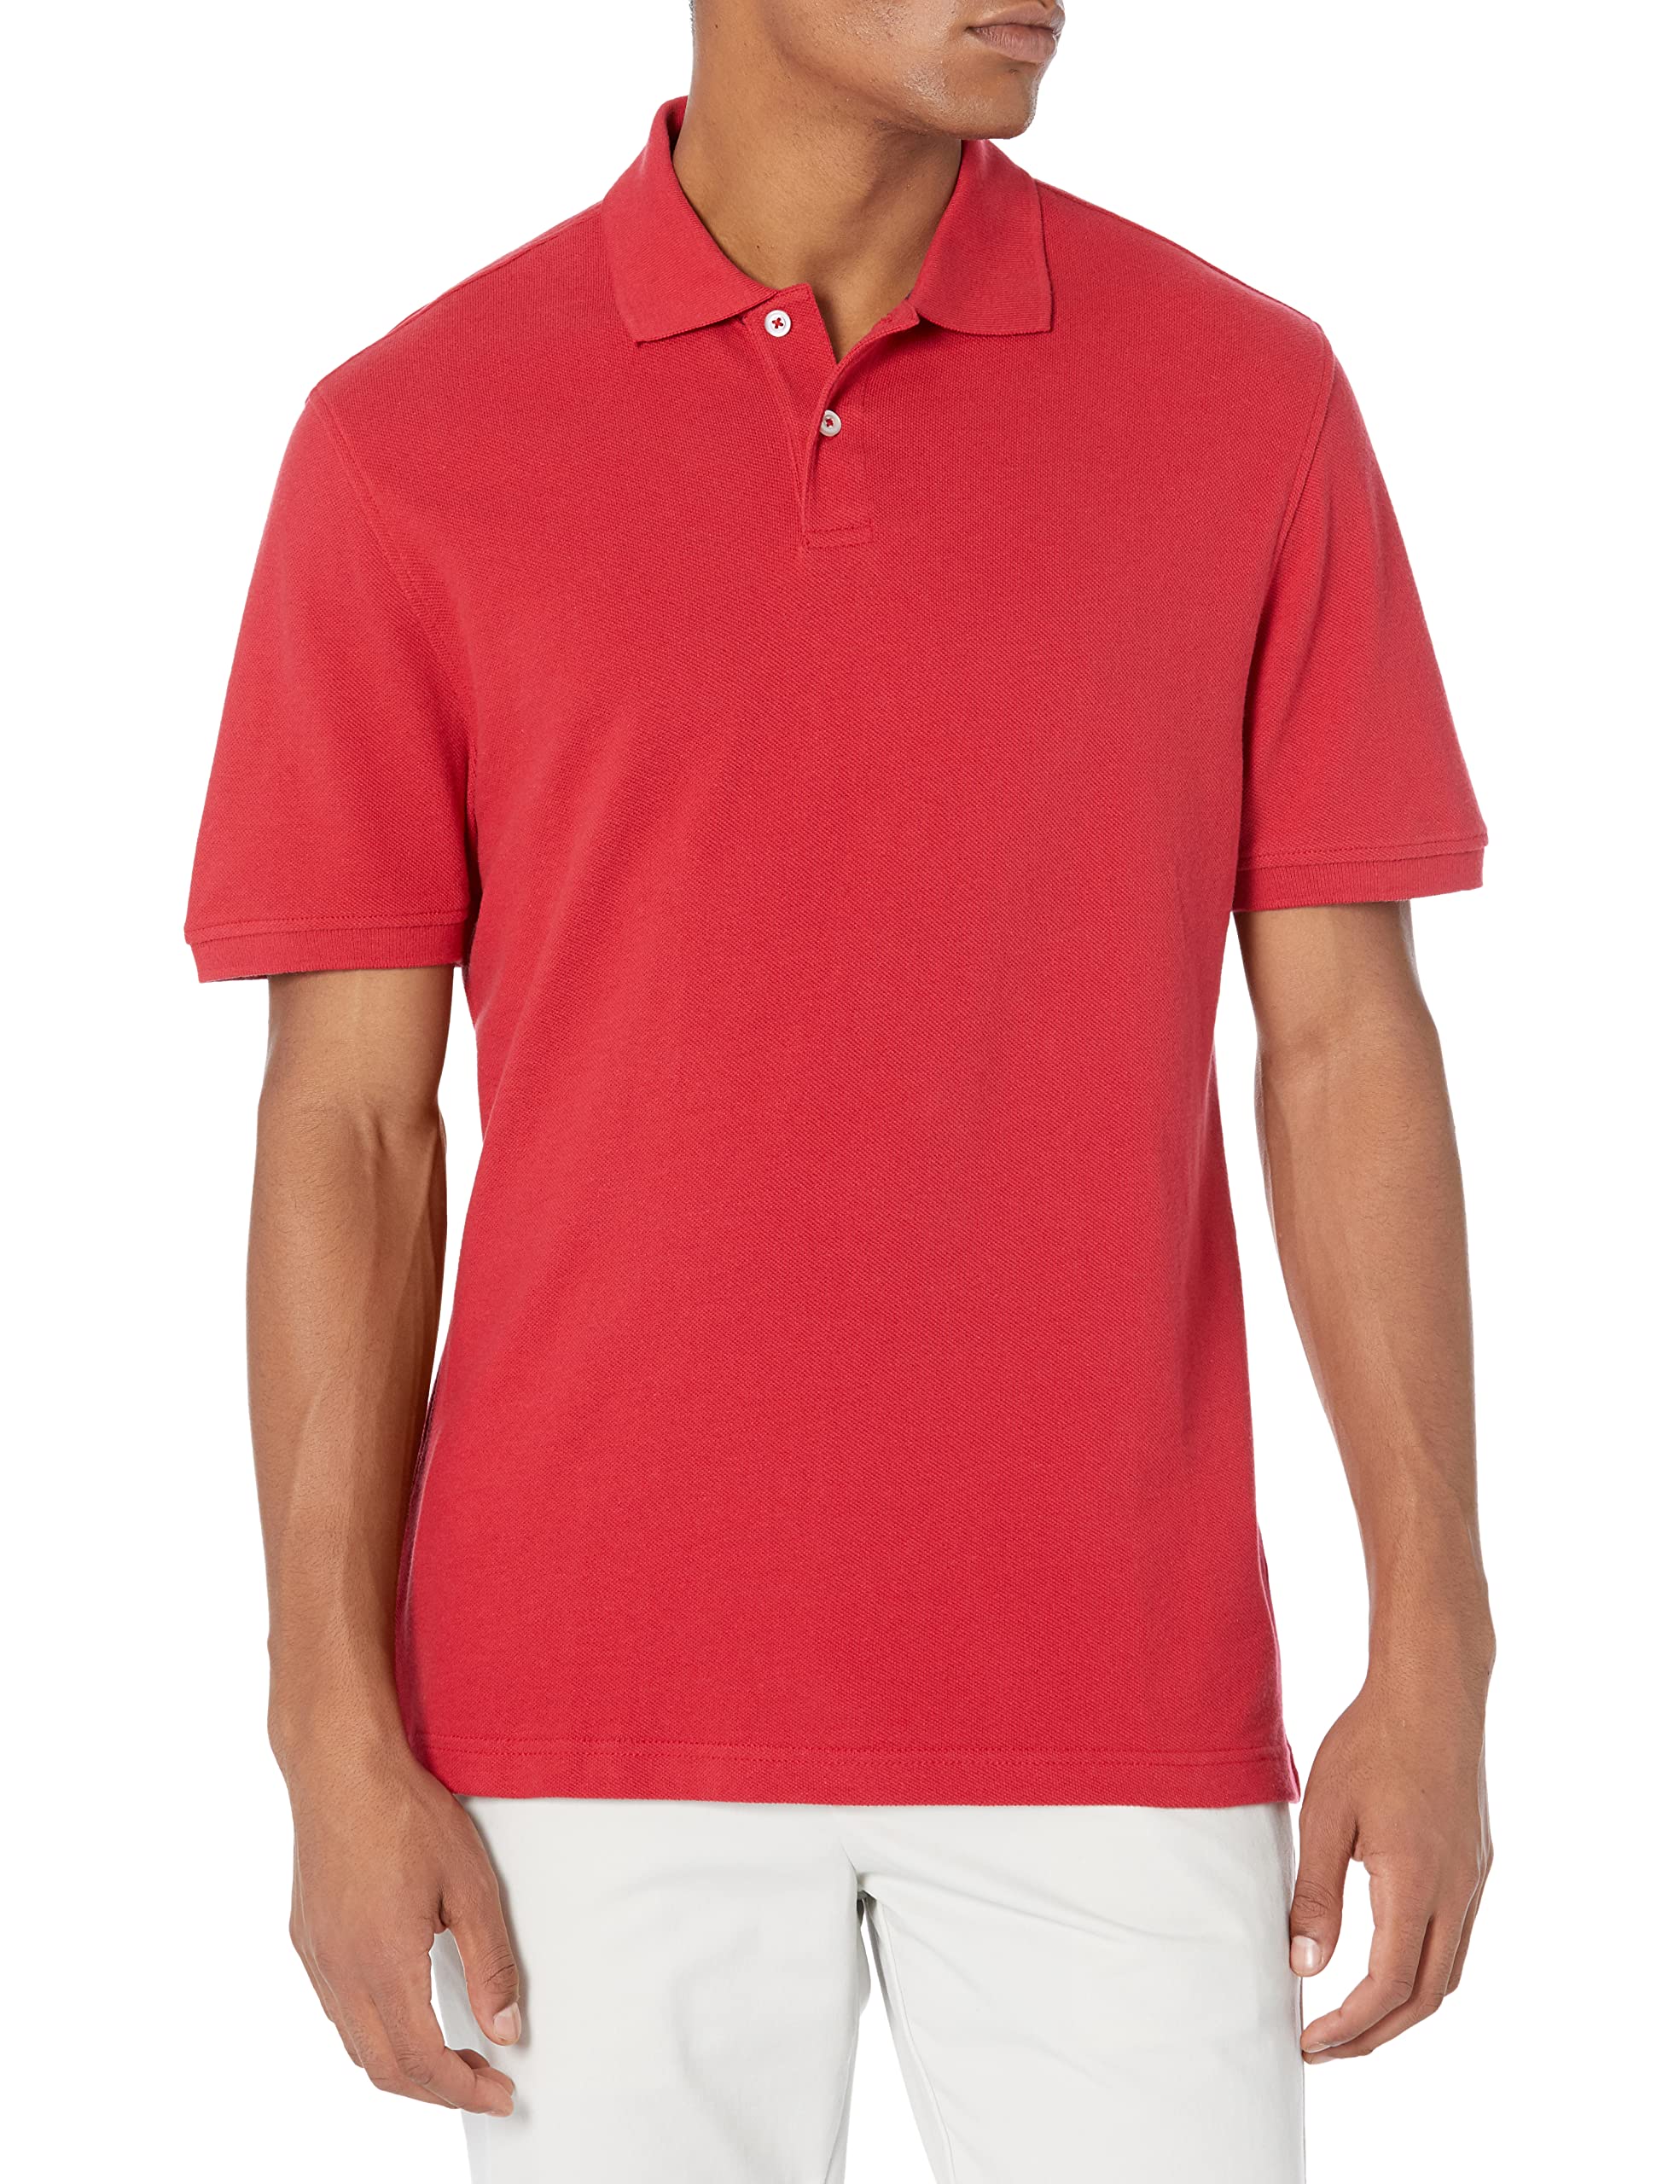 Amazon Essentials Men's Slim-Fit Cotton Pique Polo T-Shirt (Red) $5.90 + Free Shipping w/ Prime or on $35+